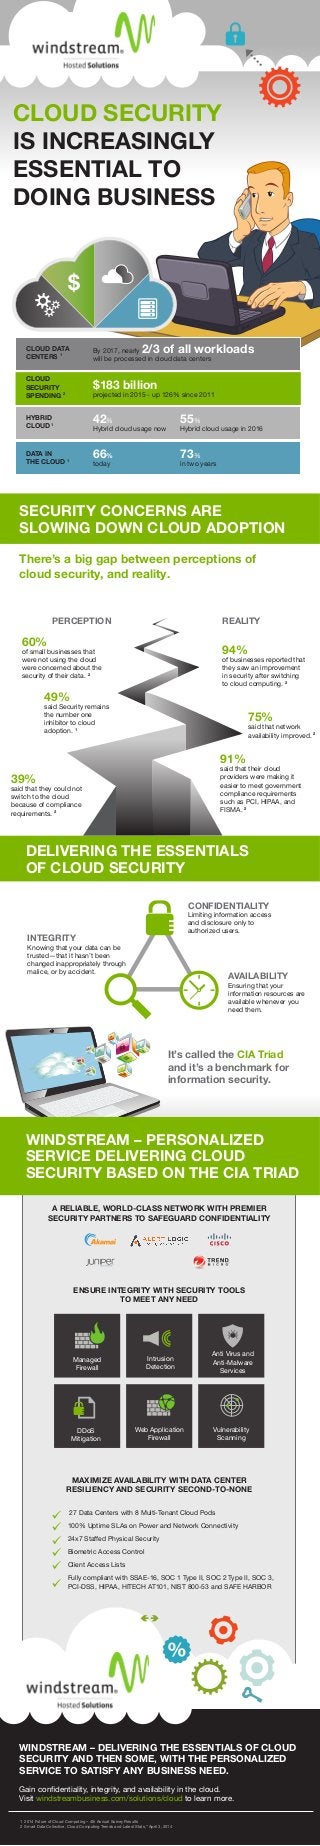 A RELIABLE, WORLD-CLASS NETWORK WITH PREMIER
SECURITY PARTNERS TO SAFEGUARD CONFIDENTIALITY
DELIVERING THE ESSENTIALS
OF CLOUD SECURITY
CLOUD SECURITY
IS INCREASINGLY
ESSENTIAL TO
DOING BUSINESS
SECURITY CONCERNS ARE
SLOWING DOWN CLOUD ADOPTION
WINDSTREAM – PERSONALIZED
SERVICE DELIVERING CLOUD
SECURITY BASED ON THE CIA TRIAD
$
There’s a big gap between perceptions of
cloud security, and reality.
60%
of small businesses that
were not using the cloud
were concerned about the
security of their data. 2
94%
of businesses reported that
they saw an improvement
in security after switching
to cloud computing. 2
PERCEPTION REALITY
39%
said that they could not
switch to the cloud
because of compliance
requirements. 2
91%
said that their cloud
providers were making it
easier to meet government
compliance requirements
such as PCI, HIPAA, and
FISMA. 2
75%
said that network
availability improved. 2
49%
said Security remains
the number one
inhibitor to cloud
adoption. 1
It’s called the CIA Triad
and it’s a benchmark for
information security.
CONFIDENTIALITY
Limiting information access
and disclosure only to
authorized users.
INTEGRITY
Knowing that your data can be
trusted—that it hasn’t been
changed inappropriately through
malice, or by accident.
AVAILABILITY
Ensuring that your
information resources are
available whenever you
need them.
ENSURE INTEGRITY WITH SECURITY TOOLS
TO MEET ANY NEED
MAXIMIZE AVAILABILITY WITH DATA CENTER
RESILIENCY AND SECURITY SECOND-TO-NONE
27 Data Centers with 8 Multi-Tenant Cloud Pods
100% Uptime SLAs on Power and Network Connectivity
24x7 Staffed Physical Security
Biometric Access Control
Client Access Lists
Fully compliant with SSAE-16, SOC 1 Type II, SOC 2 Type II, SOC 3,
PCI-DSS, HIPAA, HITECH AT101, NIST 800-53 and SAFE HARBOR
Intrusion
Detection
Vulnerability
Scanning
Web Application
Firewall
DDoS
Mitigation
Managed
Firewall
Anti Virus and
Anti-Malware
Services
By 2017, nearly 2/3 of all workloads
will be processed in cloud data centers
66%
today
42%
Hybrid cloud usage now
55%
Hybrid cloud usage in 2016
$183 billion
projected in 2015 - up 126% since 2011
DATA IN
THE CLOUD 1
CLOUD
SECURITY
SPENDING 2
CLOUD DATA
CENTERS 1
HYBRID
CLOUD1
73%
in two years
1 2014 Future of Cloud Computing – 4th Annual Survey Results
2 Smart Data Collective, Cloud Computing Trends and Latest Stats,” April 3, 2014
WINDSTREAM – DELIVERING THE ESSENTIALS OF CLOUD
SECURITY AND THEN SOME, WITH THE PERSONALIZED
SERVICE TO SATISFY ANY BUSINESS NEED.
Gain conﬁdentiality, integrity, and availability in the cloud.
Visit windstreambusiness.com/solutions/cloud to learn more.
 